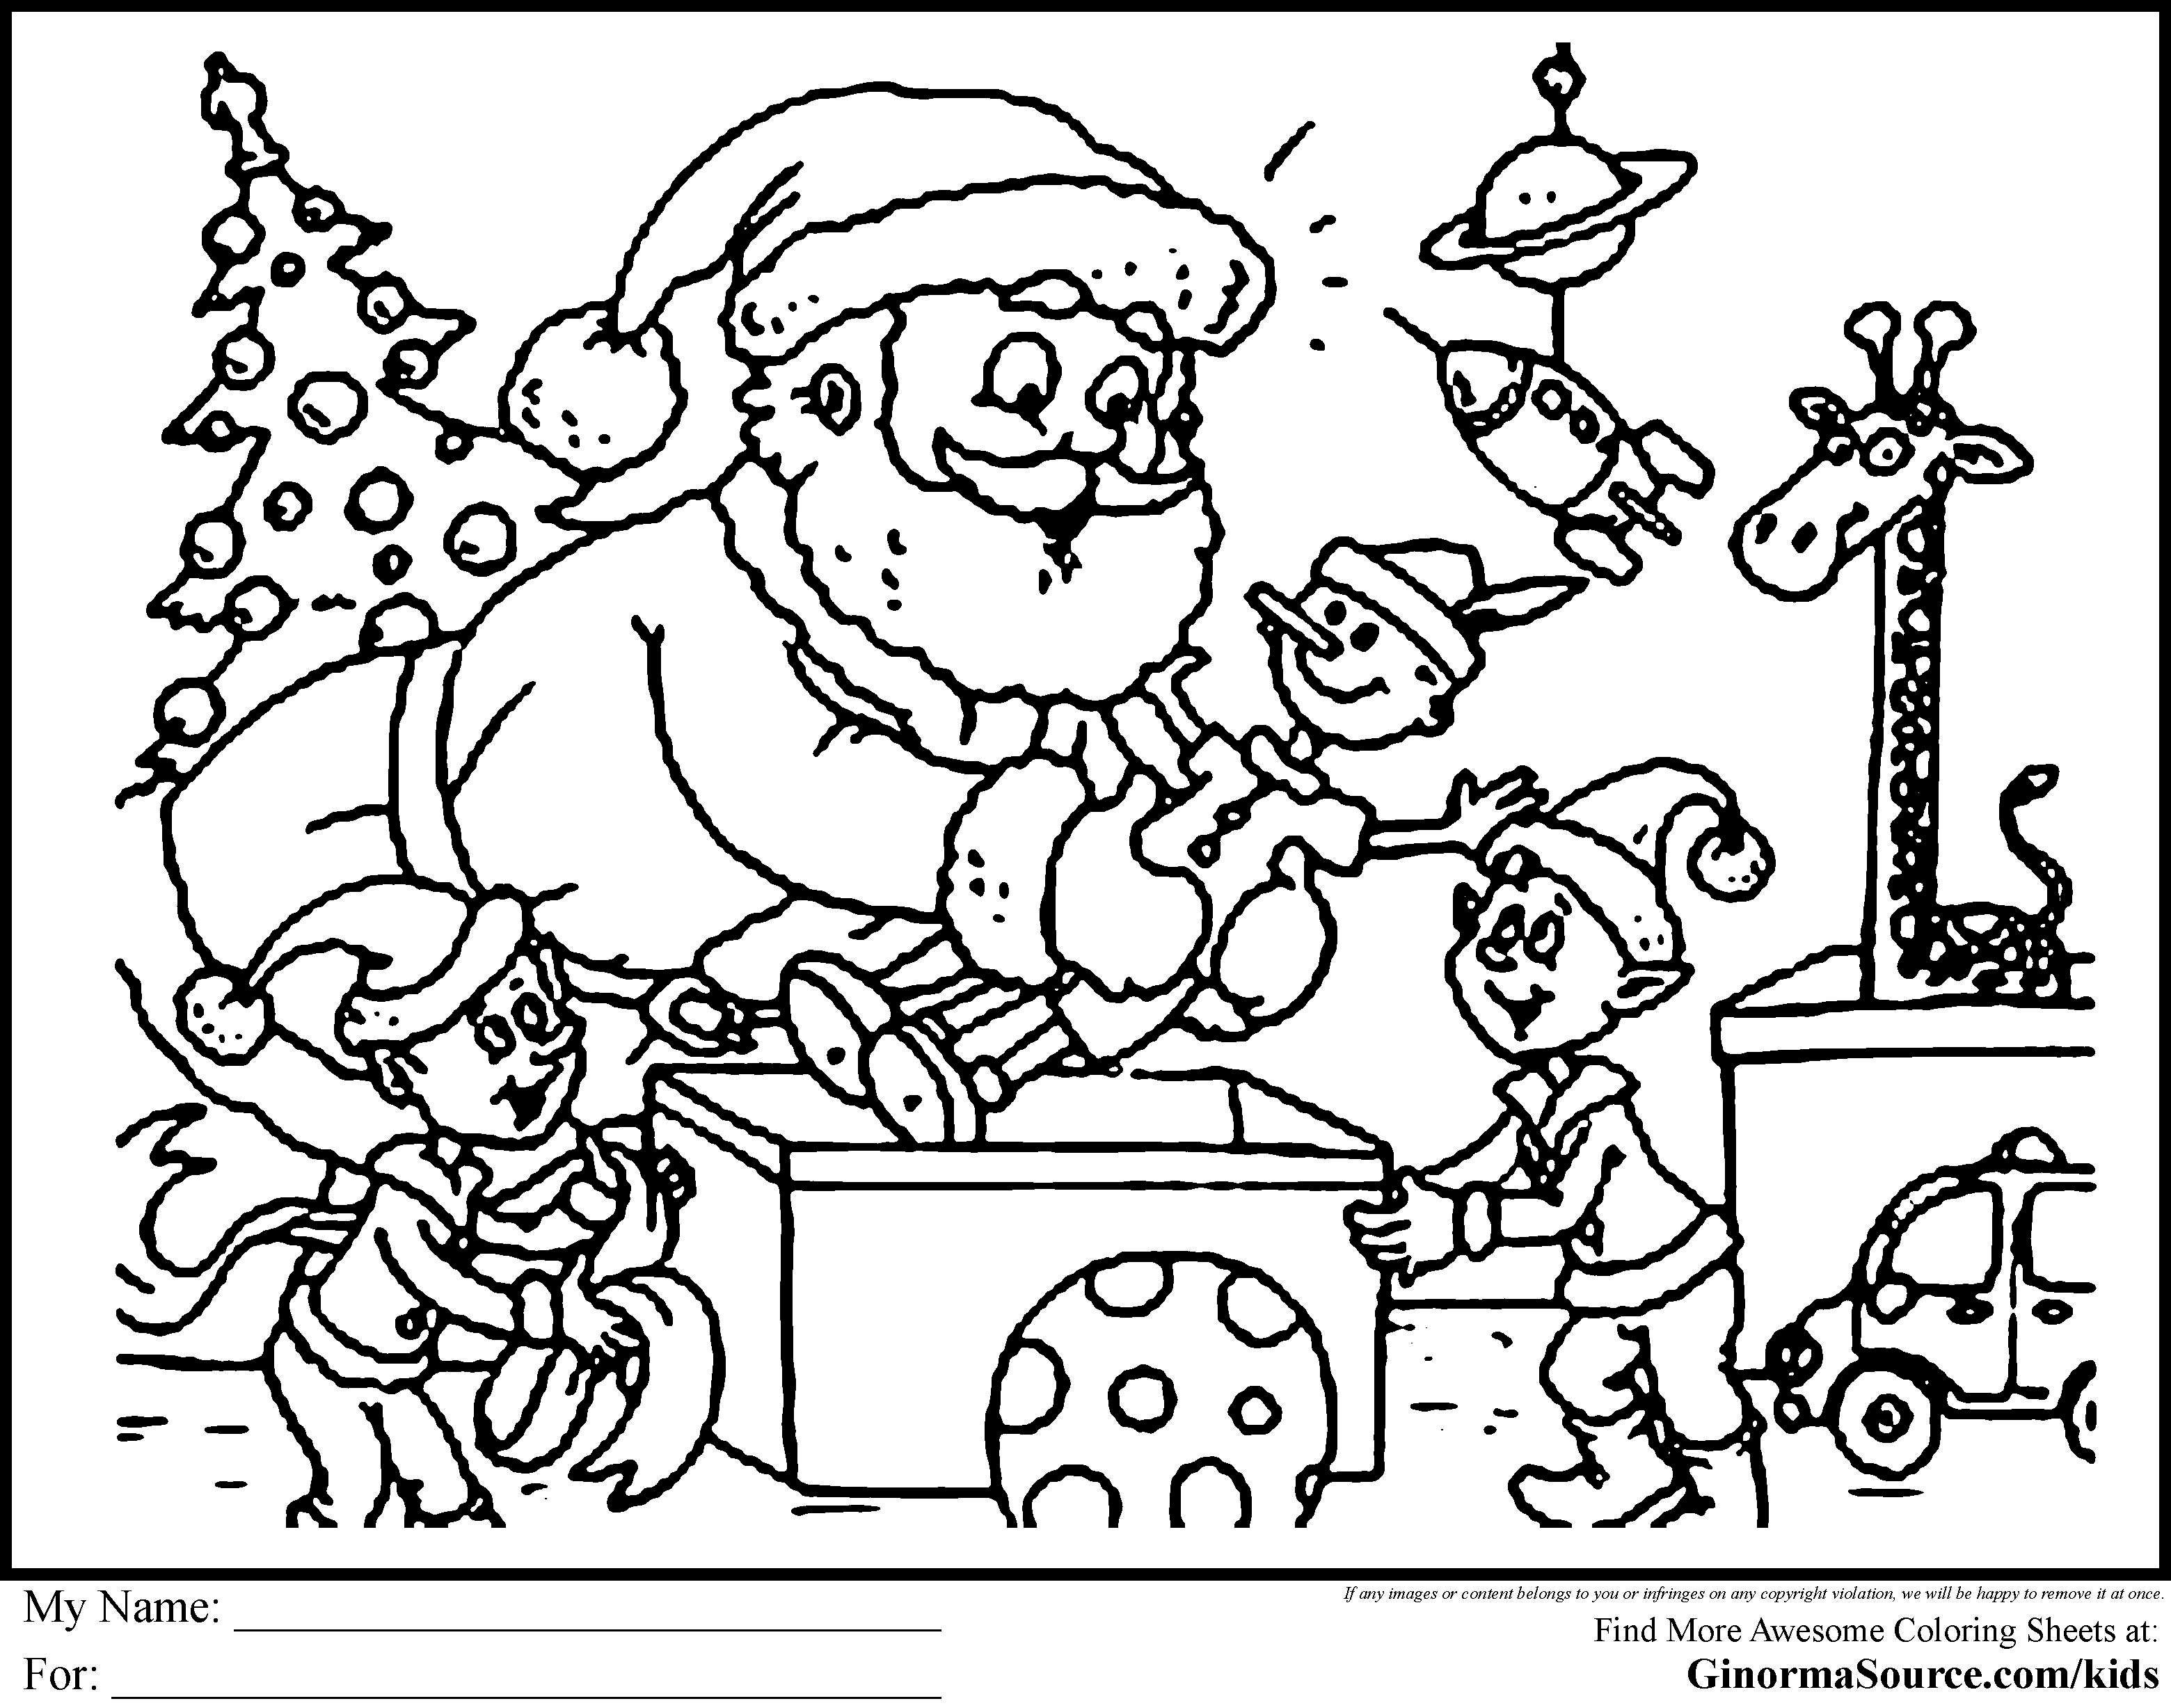 Free Christmas Printable Coloring Pages Merry Christmas Image Best Of Christmas Coloring Pages For Kids